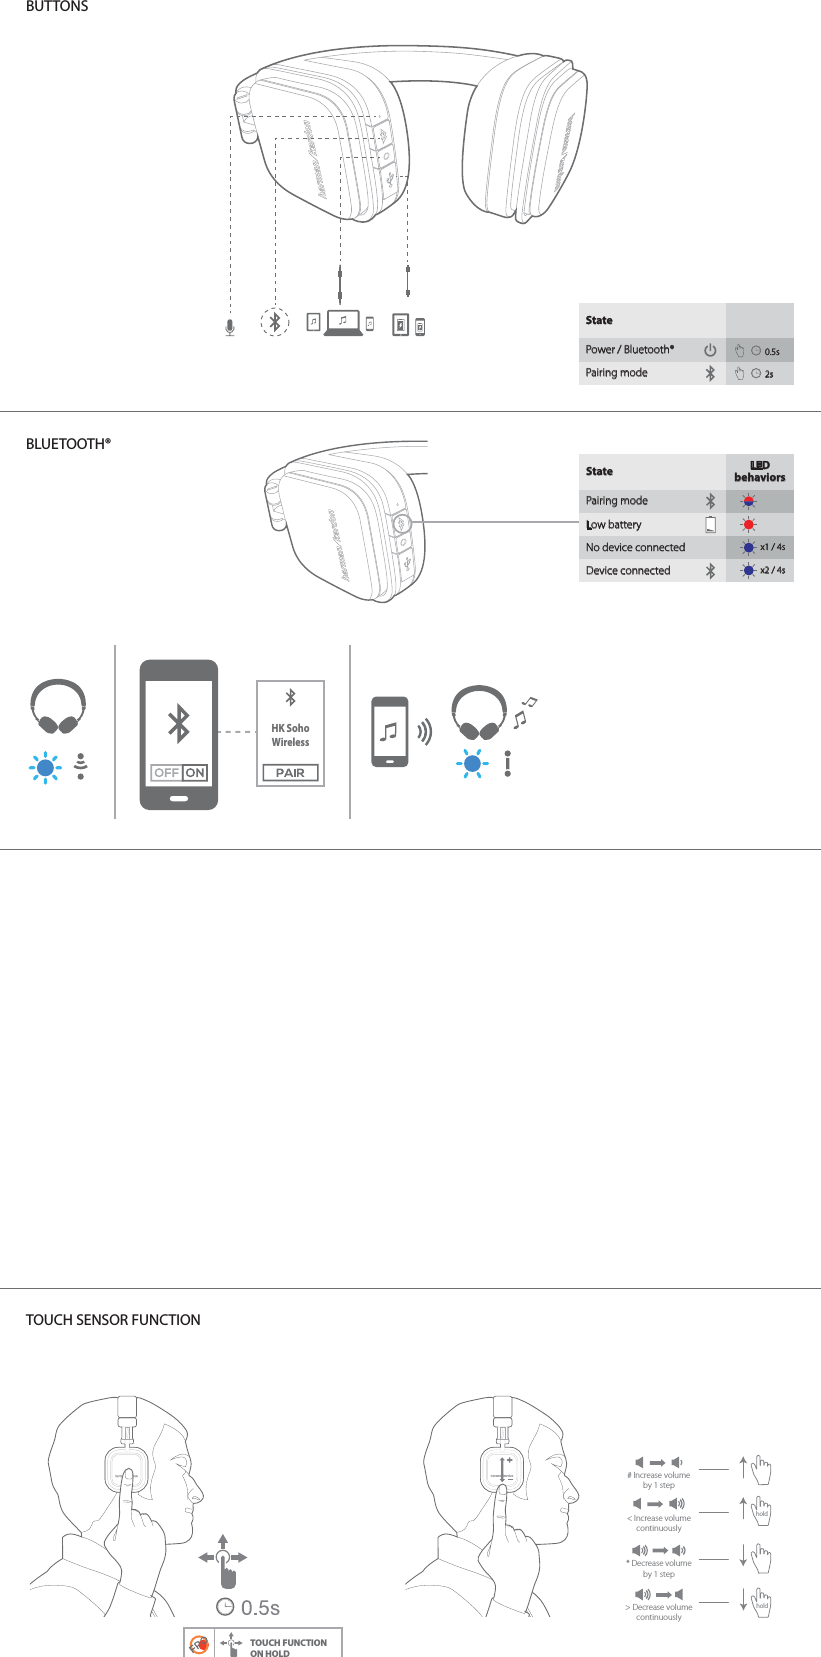 TOUCH FUNCTIONON HOLDHK Soho WirelessBLUETOOTH®HK Soho WirelessNFC AreaNFCTOUCH SENSOR FUNCTIONBUTTONSLholdhold# Increase volumeby 1 step* Decrease volumeby 1 step&lt; Increase volumecontinuously&gt; Decrease volumecontinuouslyx2 / 4sx1 / 4sStatePairing modeLow batteryNo device connectedLEDbehaviorsDevice connectedStatePower / Bluetooth®Pairing mode0.5s2s